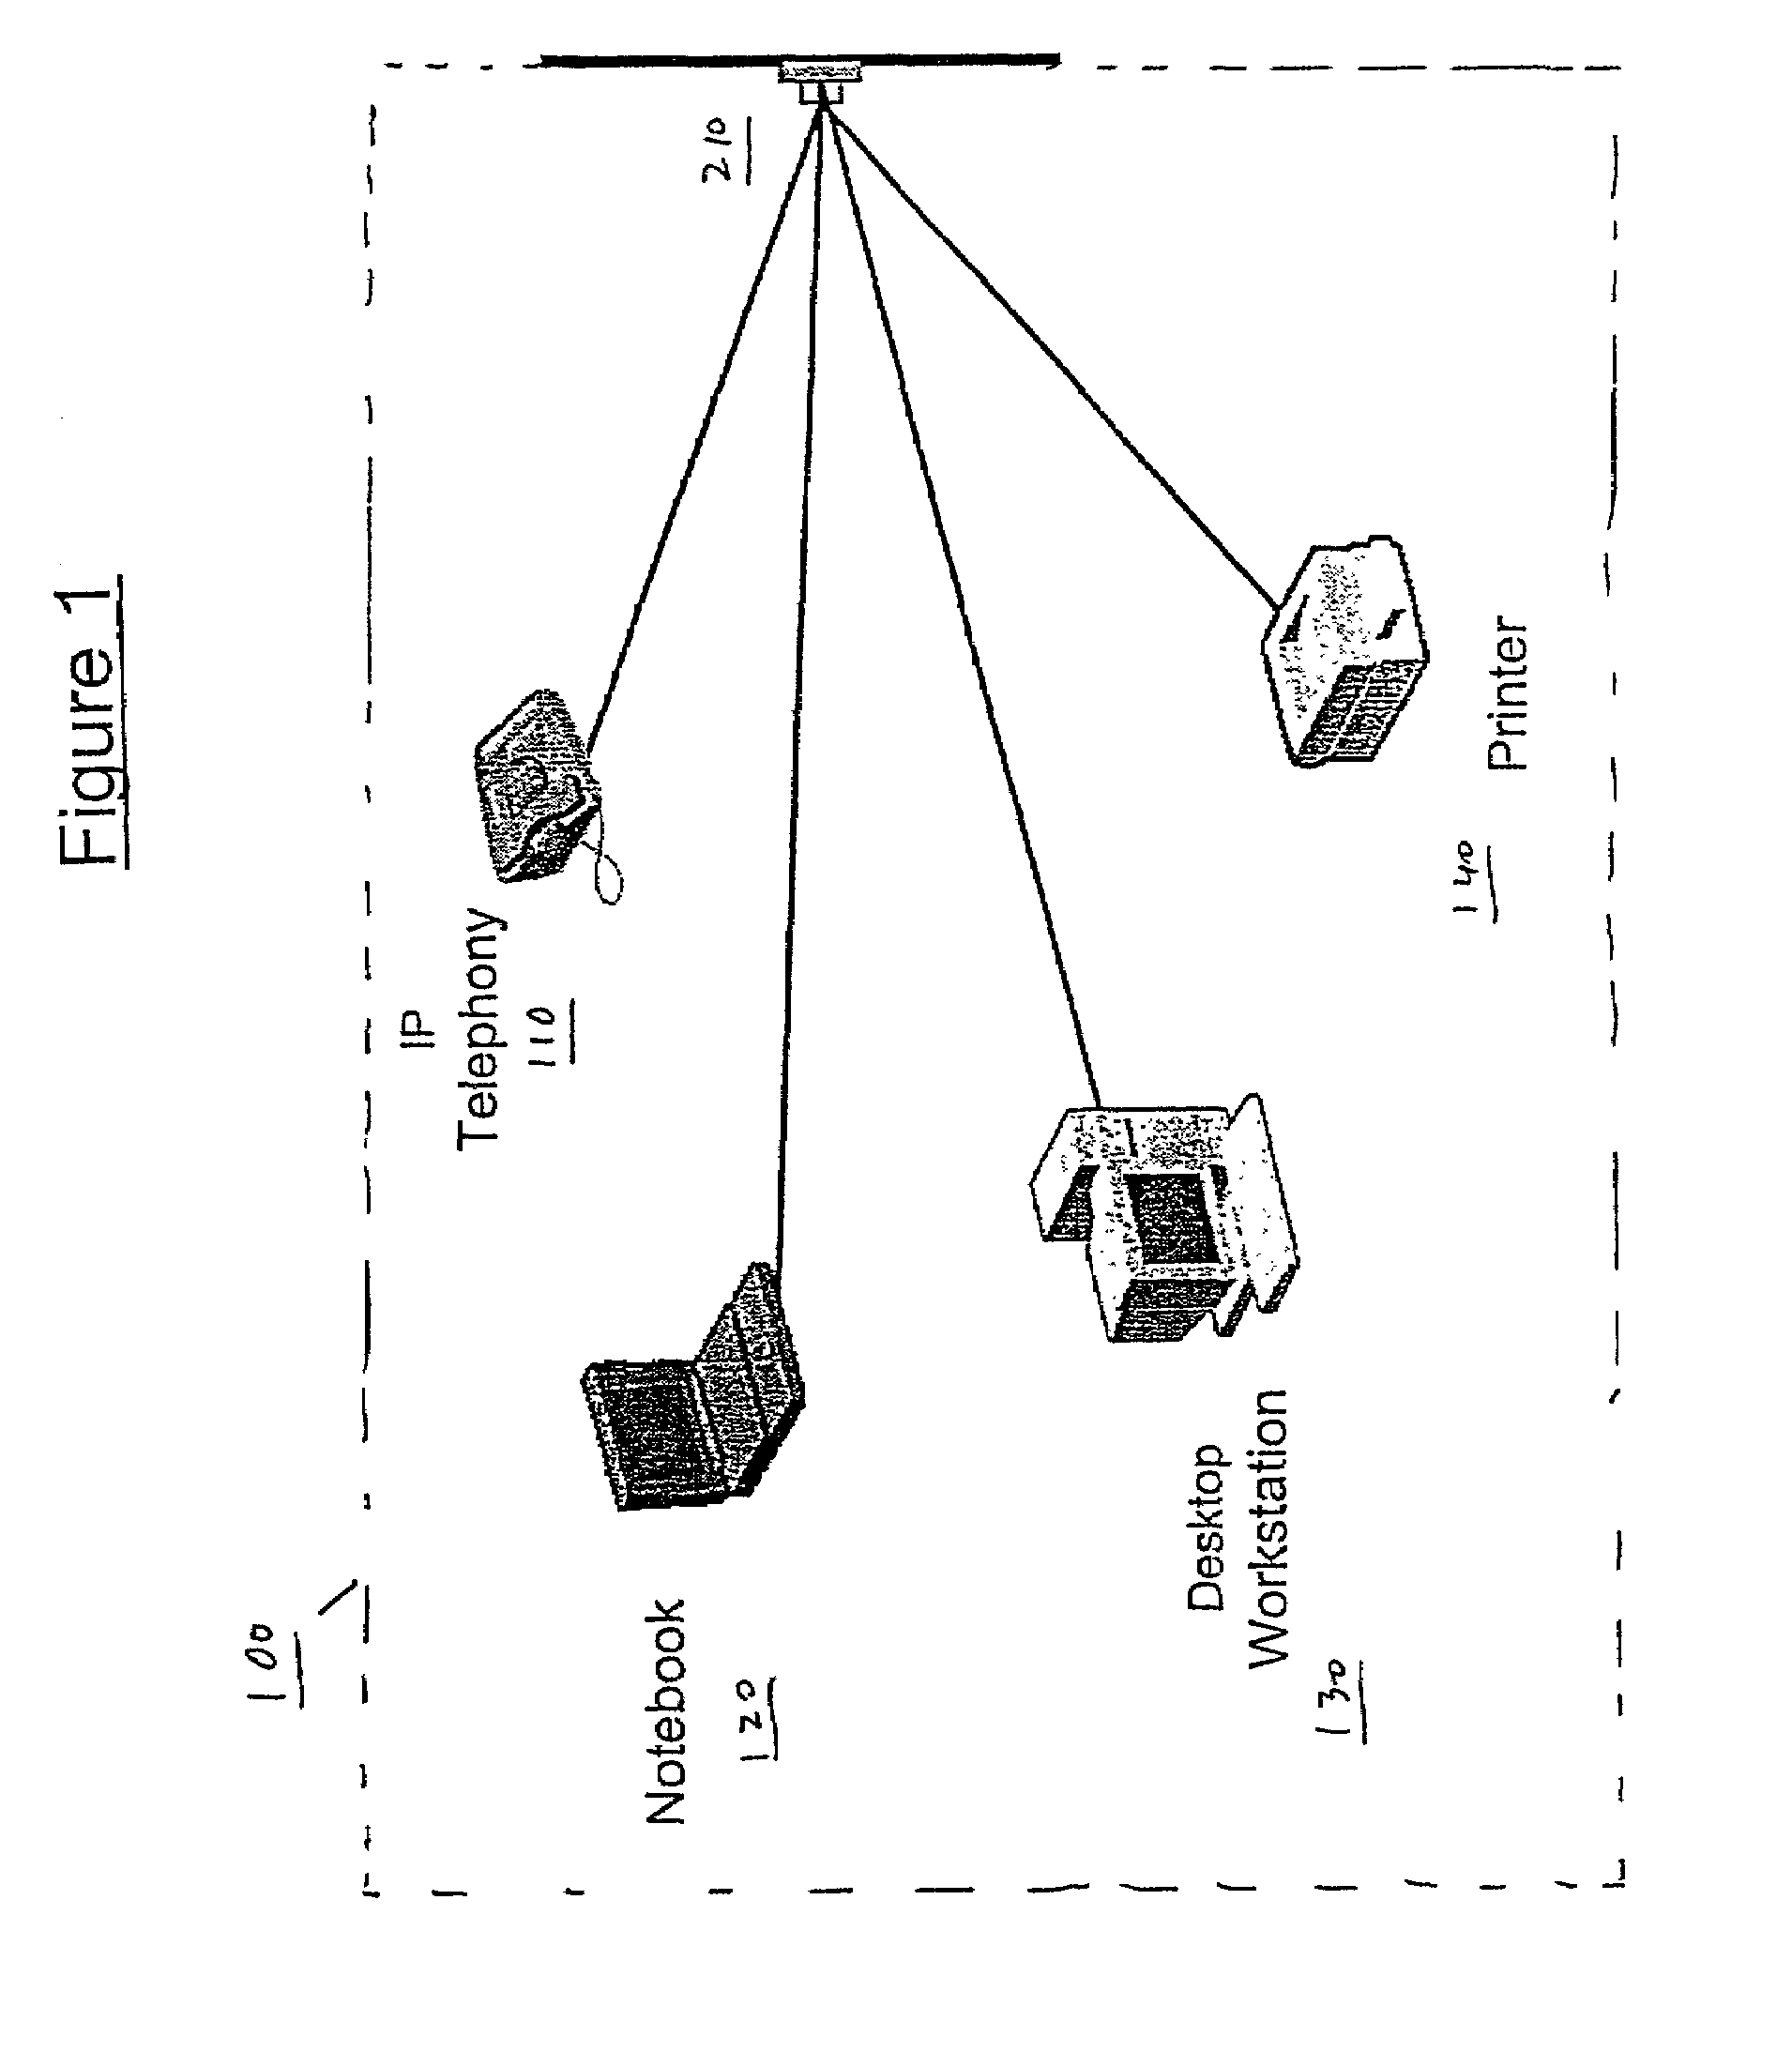 Device and method for managing fault detection and fault isolation in voice and data networks